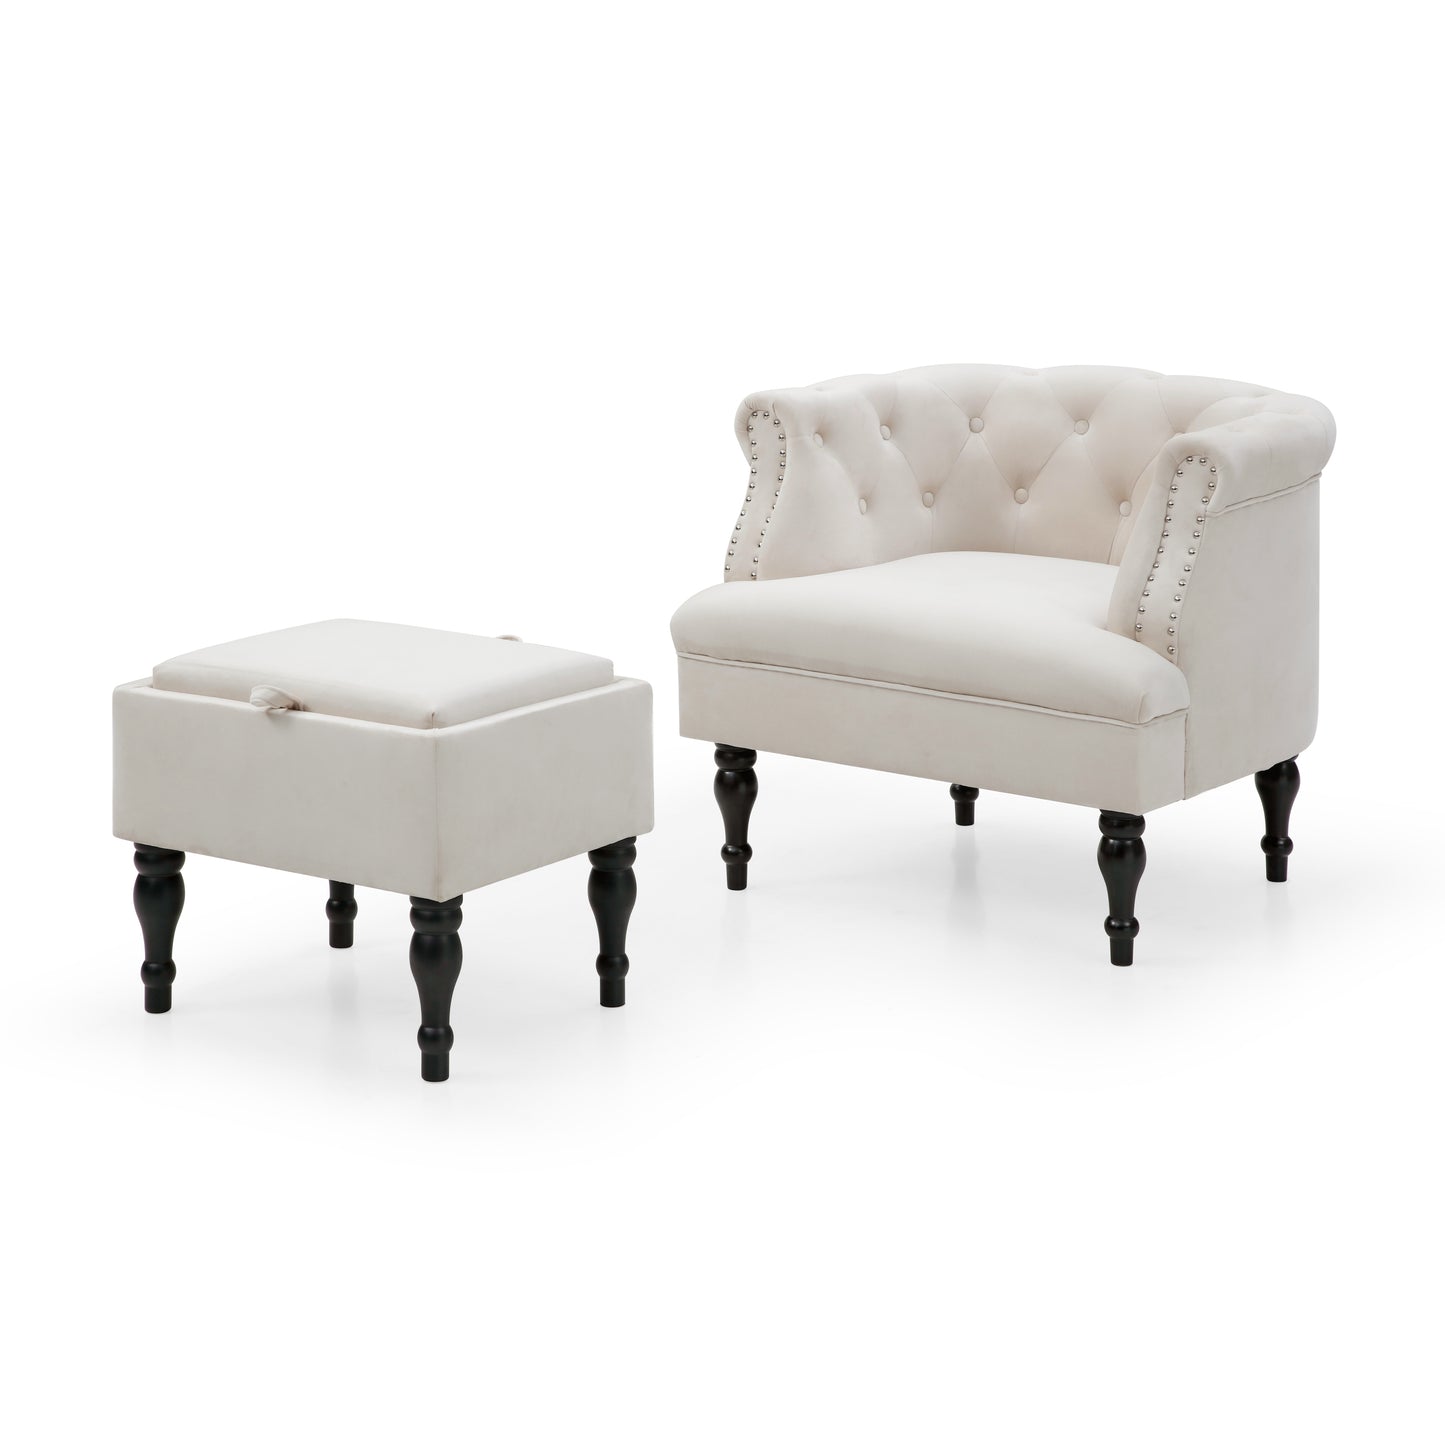 Velvet Upholstered Accent Chair Set with Ottoman, Button Tufted, Storage Ottoman with Tray, Contemporary Style